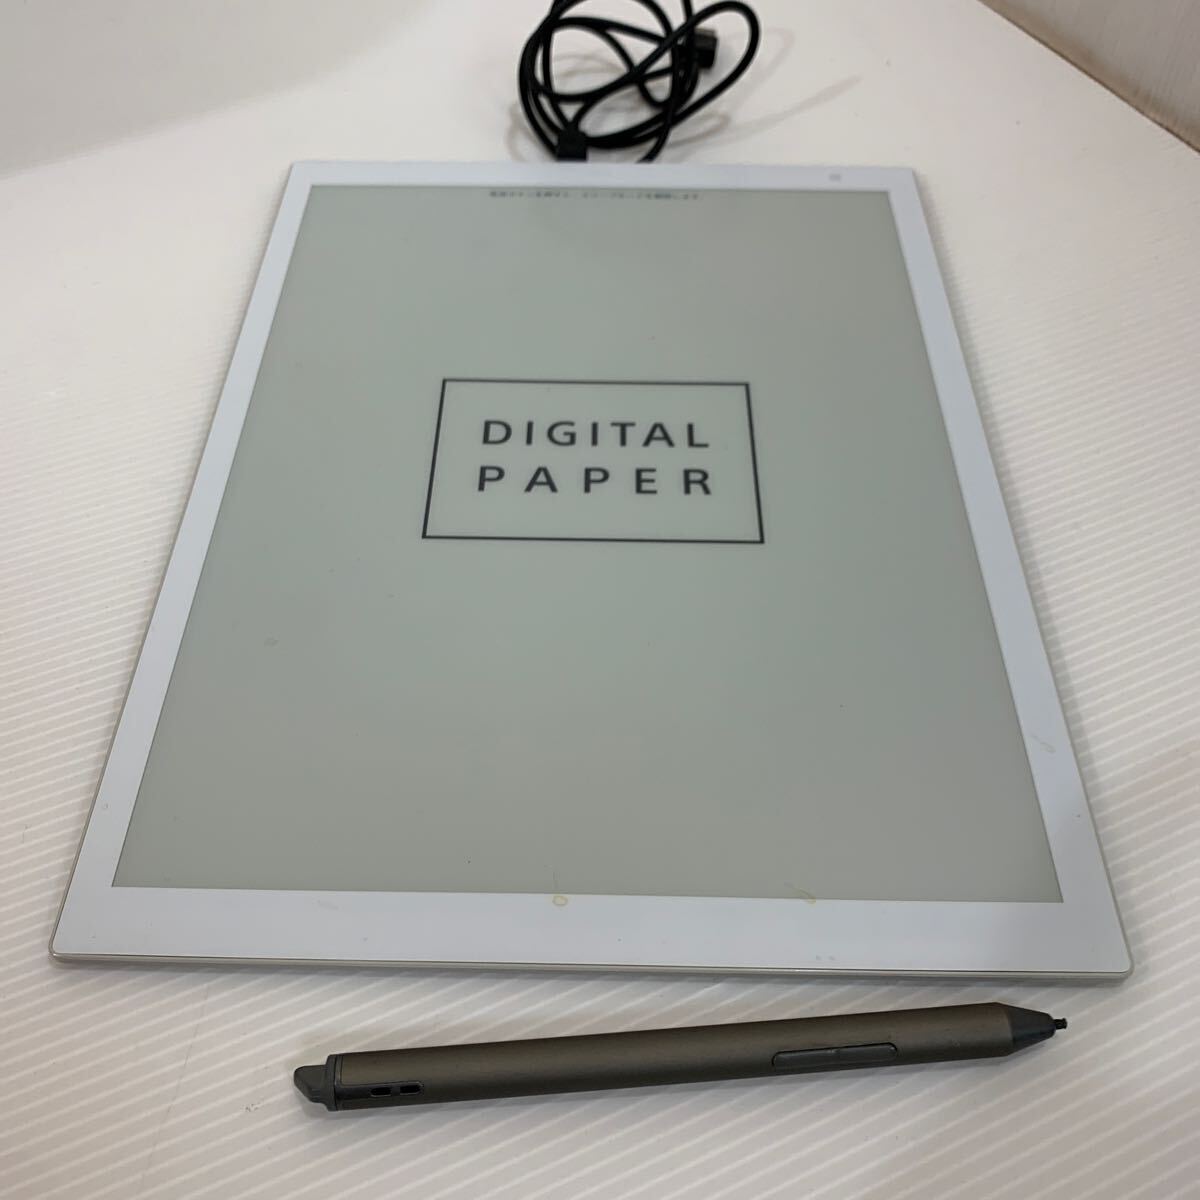 SONY Digital Paper DPT-RP1 13.3 inch with Pen 